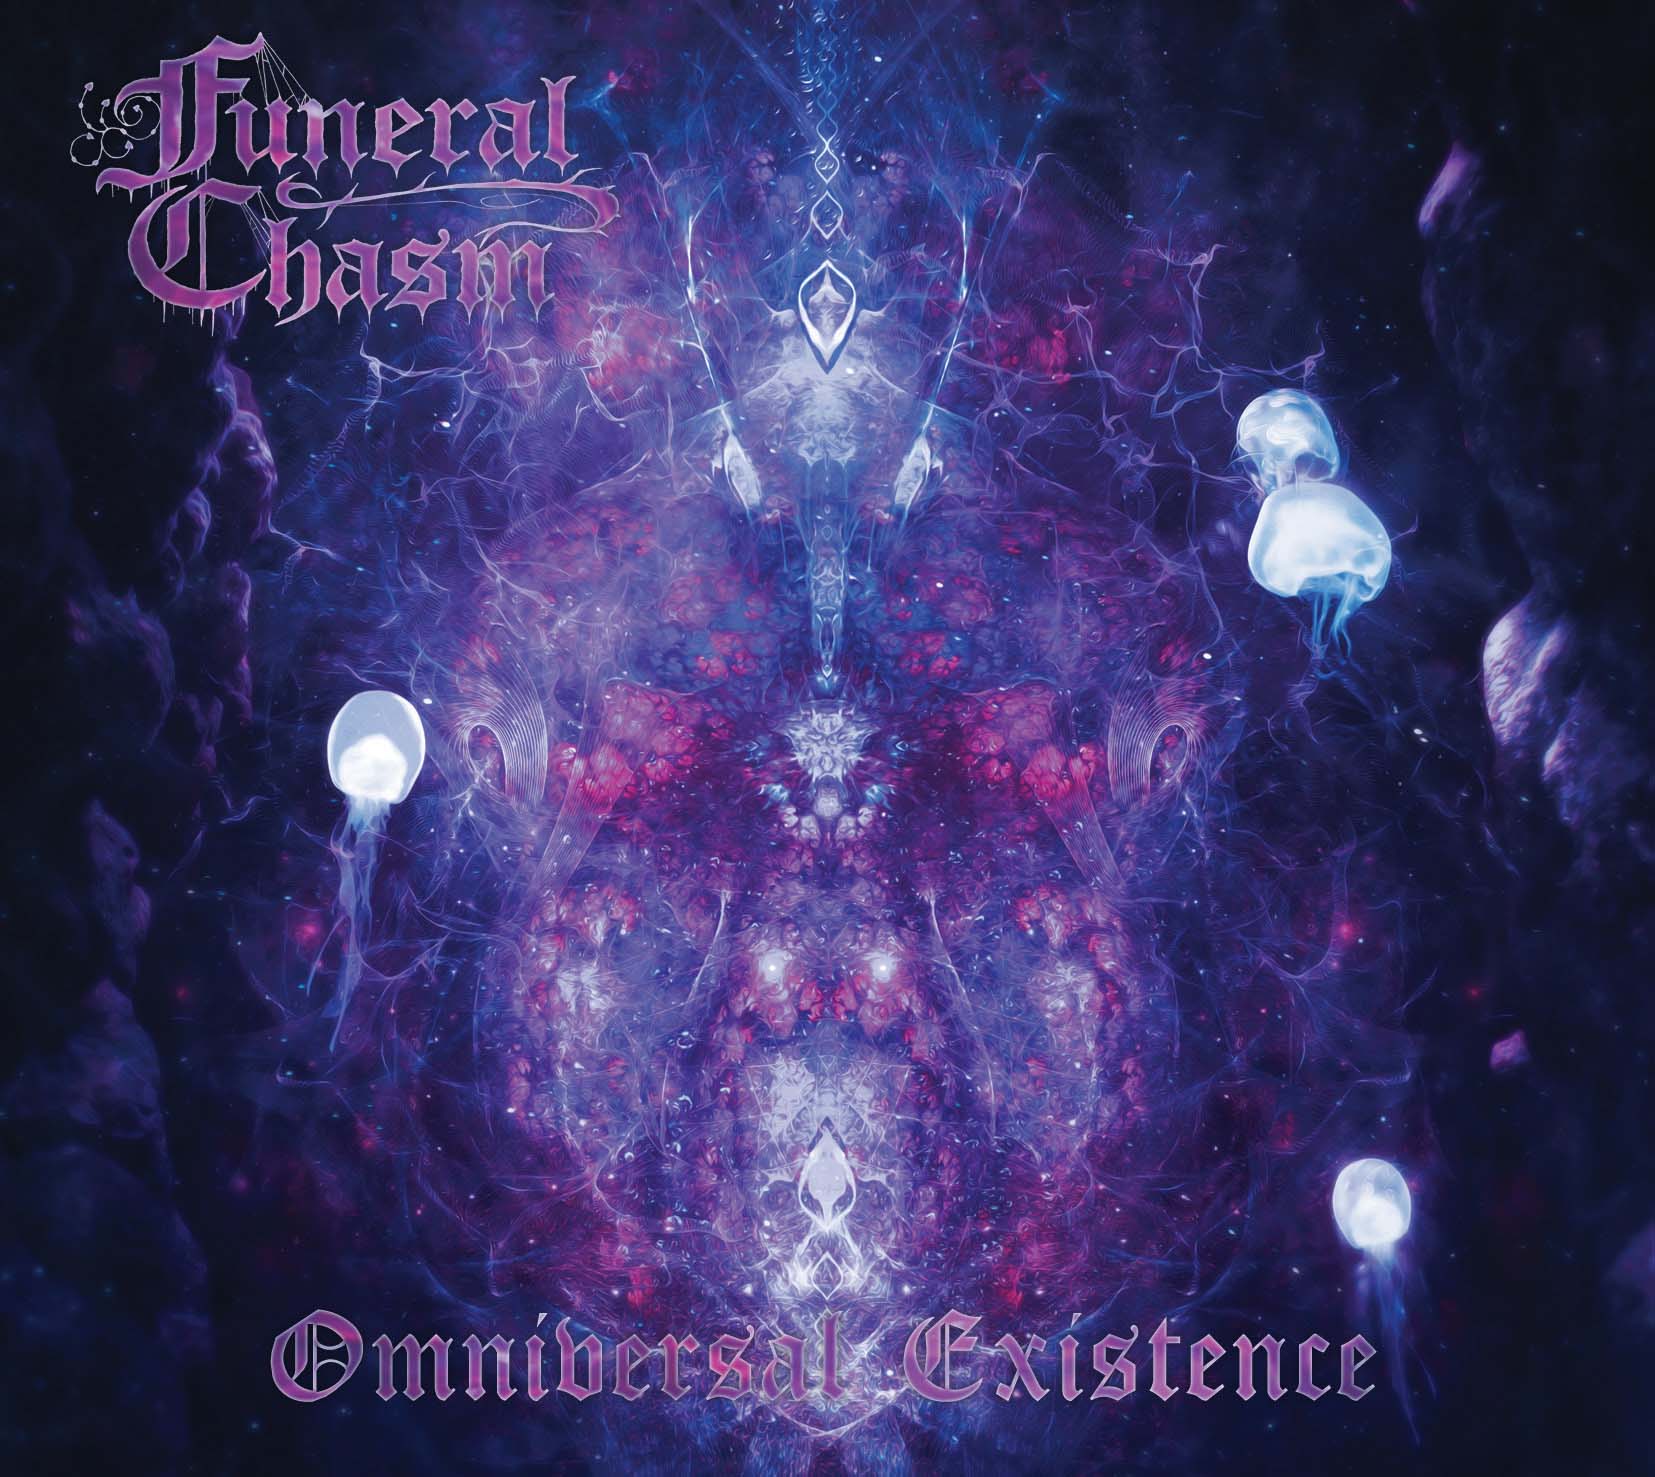 FUNERAL CHASM / Omniversal Existence (digi)